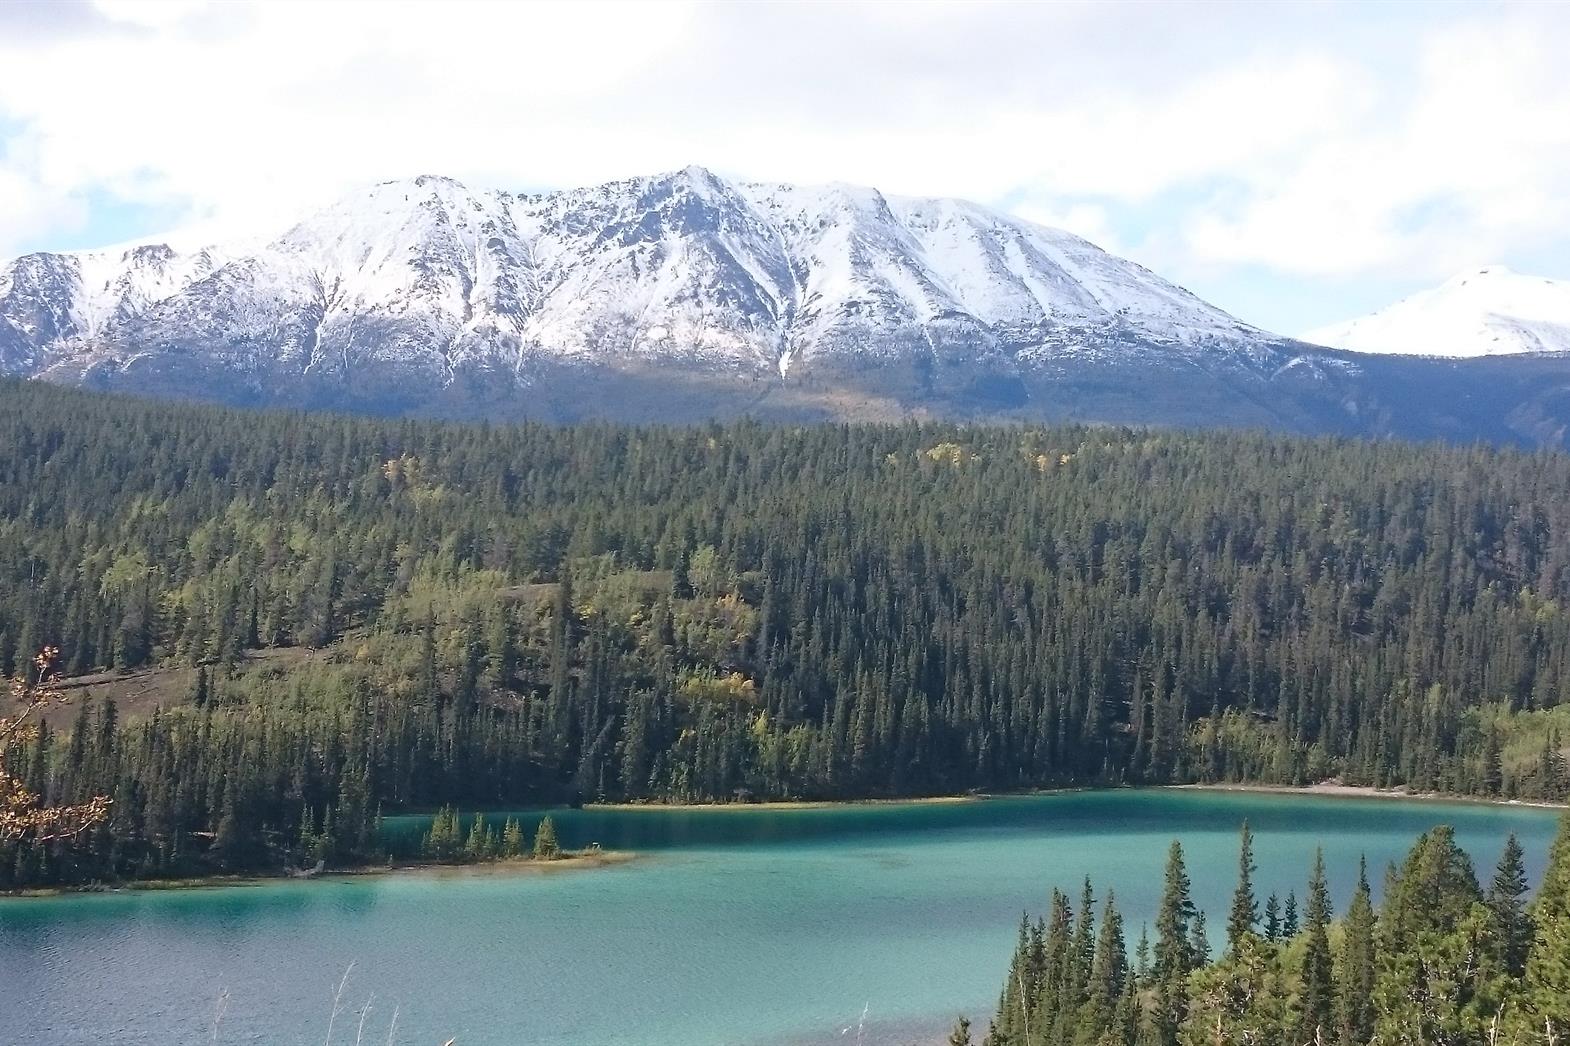 Emerald Lake Yukon, a blue-green lake in front of a green pine forest. A snow capped mountain in the background.